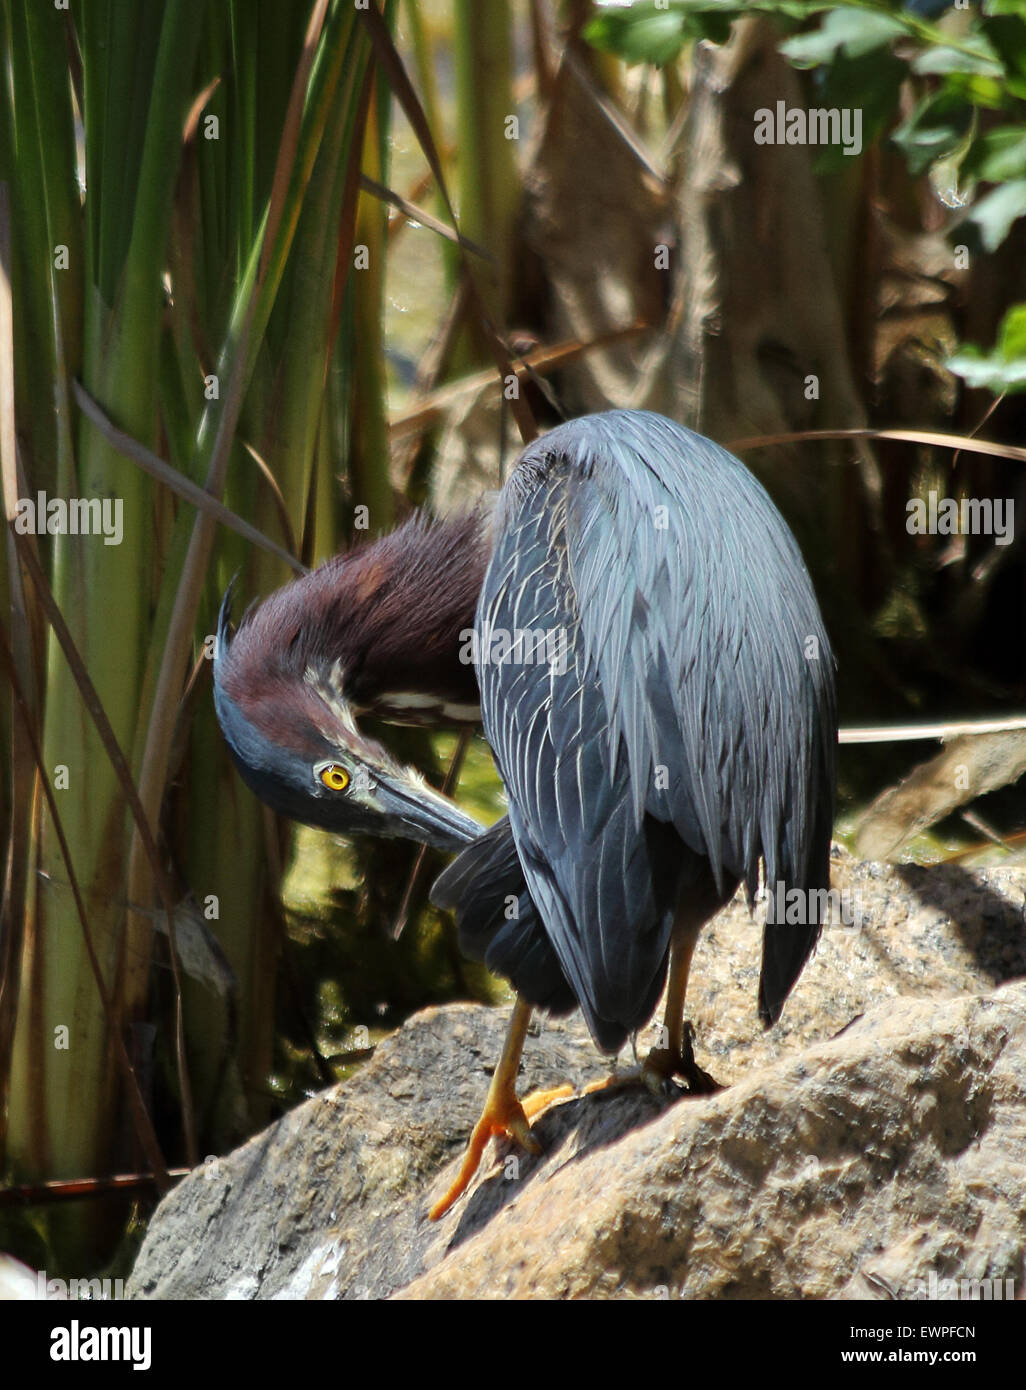 A Tri-colored heron preening at the waters edge. Stock Photo